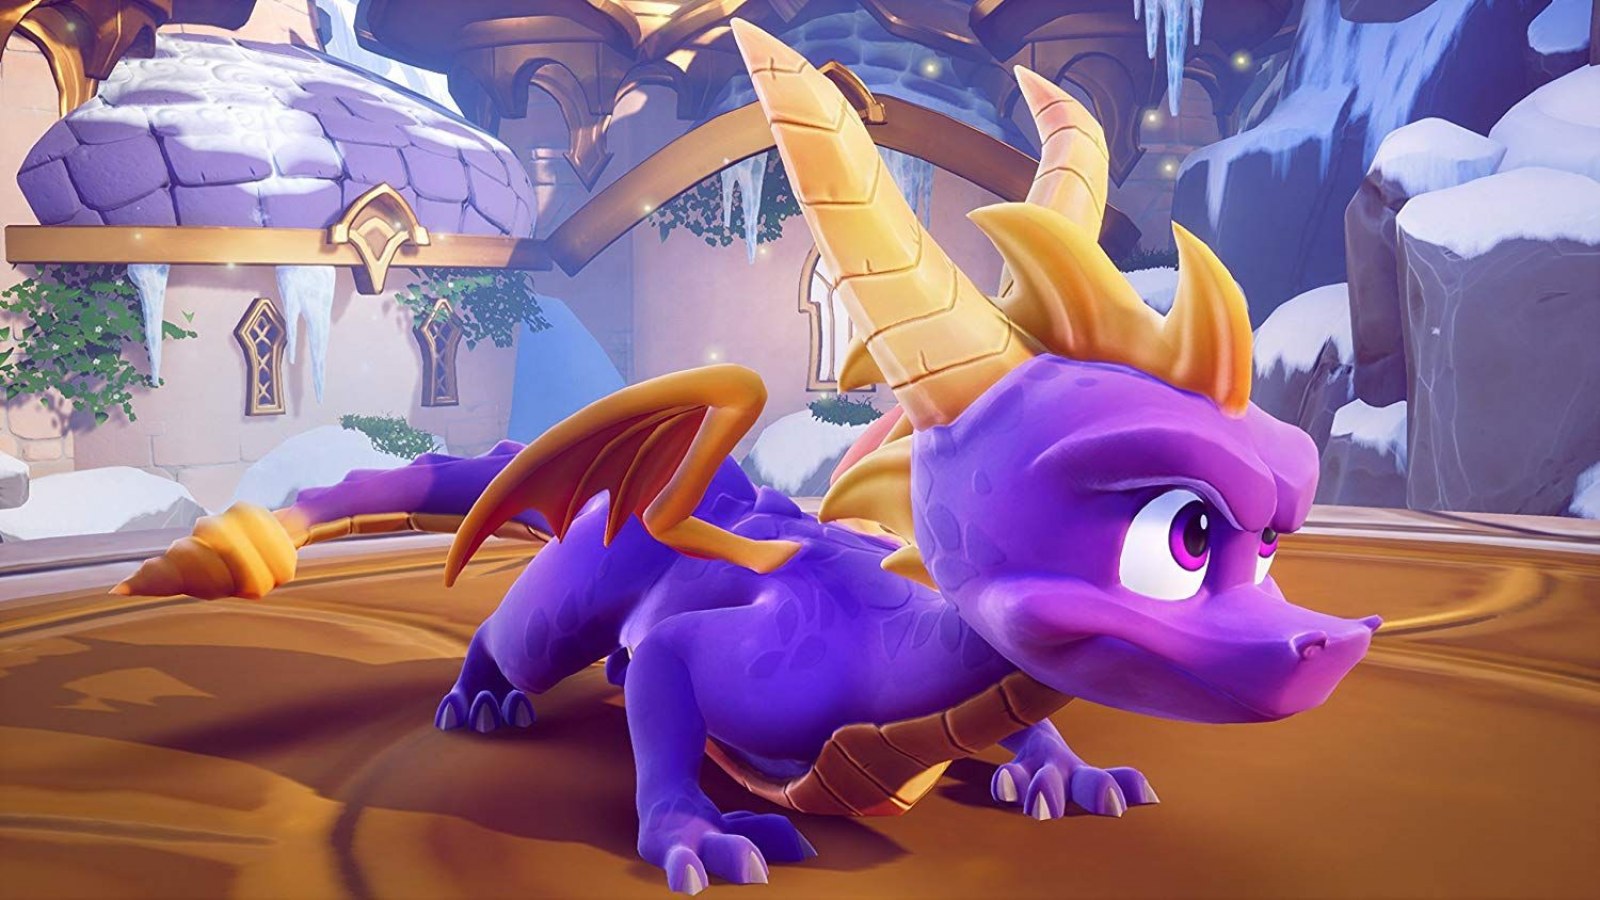 Spyro Reignited Trilogy' Nintendo Switch Release Possibly Leaked in Ga...